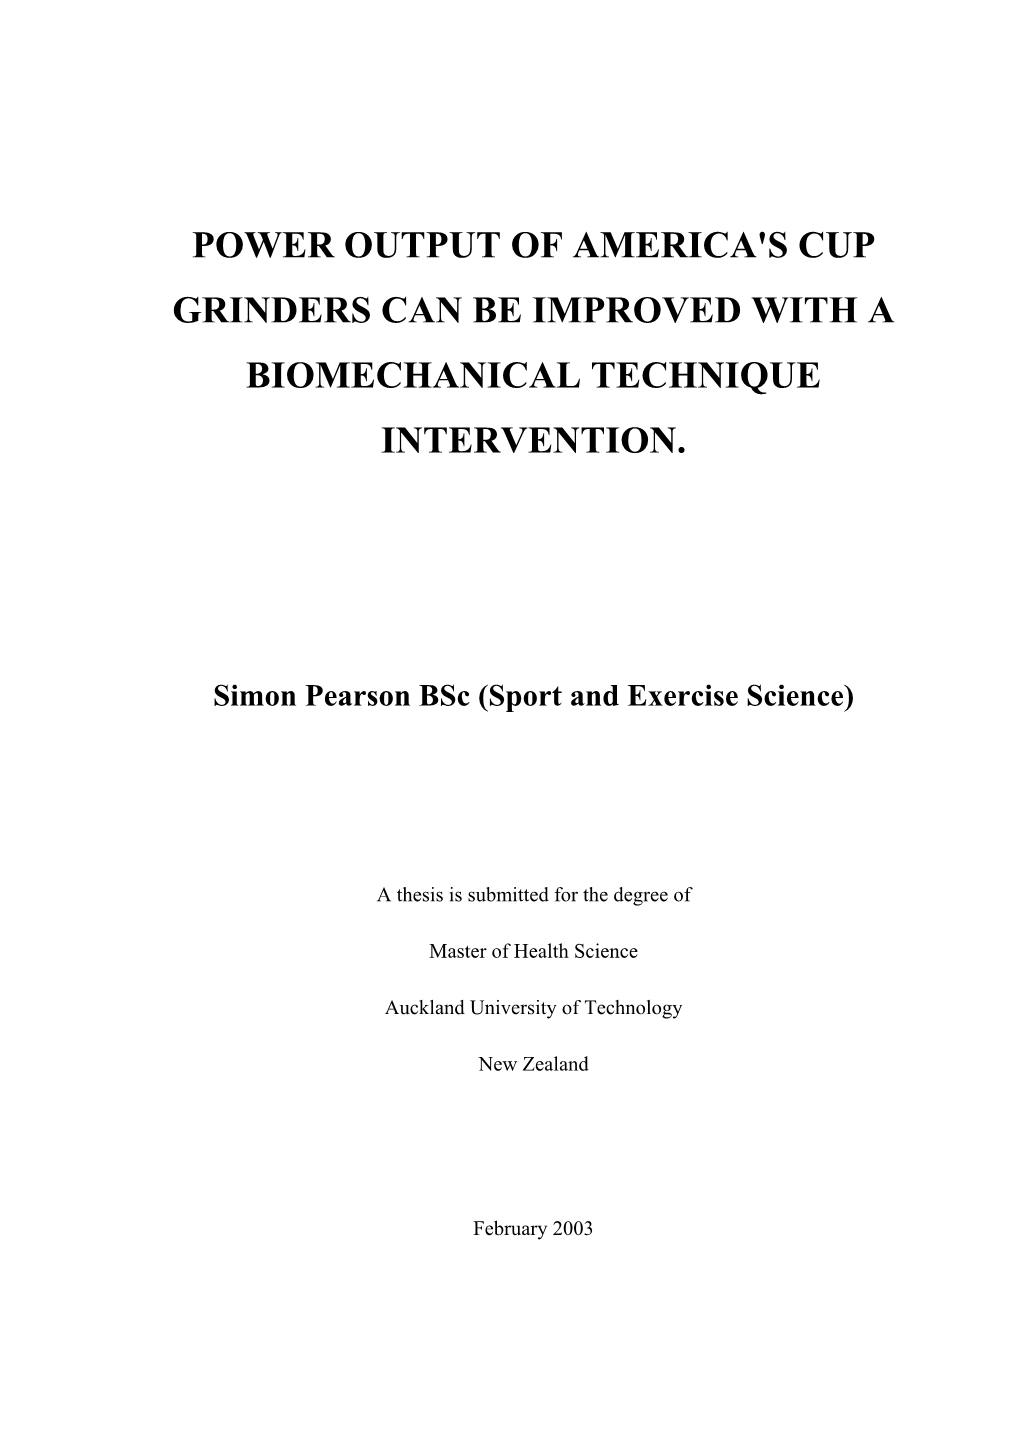 Power Output of America's Cup Grinders Can Be Improved with a Biomechanical Technique Intervention